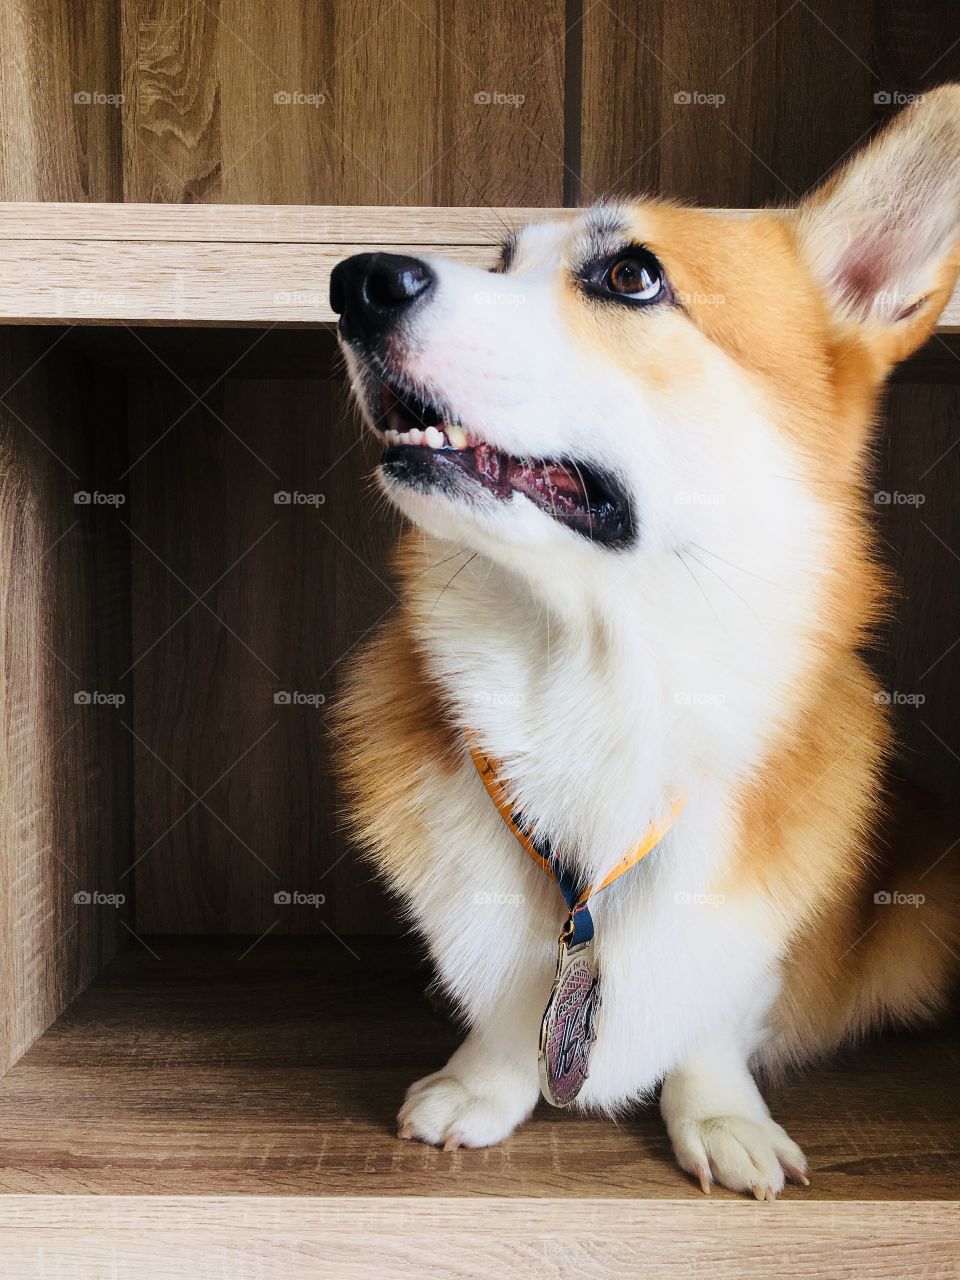 Corgi dog brown and white in the cabinet